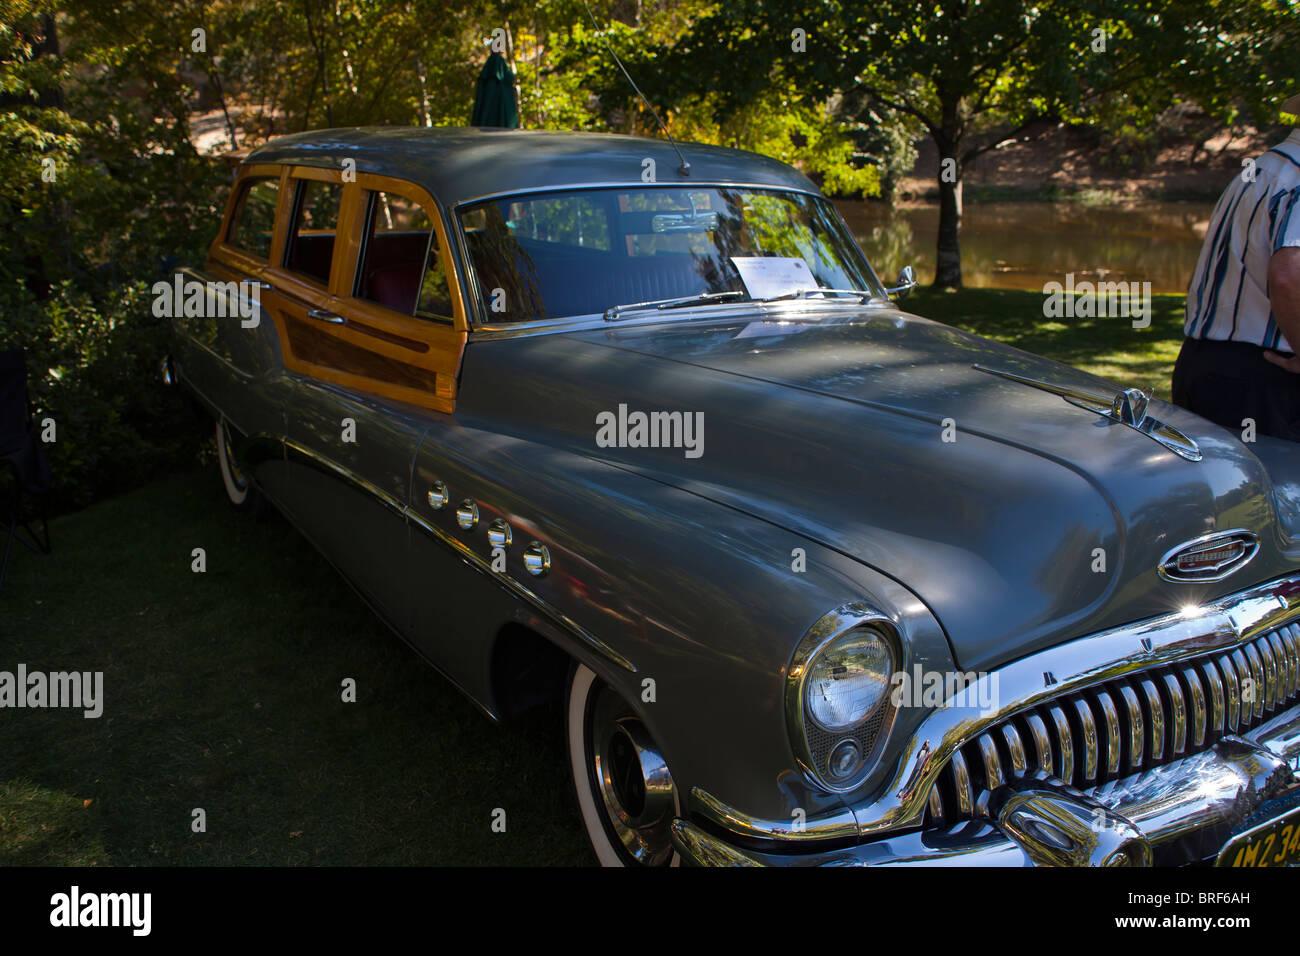 A 1953 Buick Roadmaster Estate Wagon at the 2010 Ironstone Concours D'elegance Stock Photo